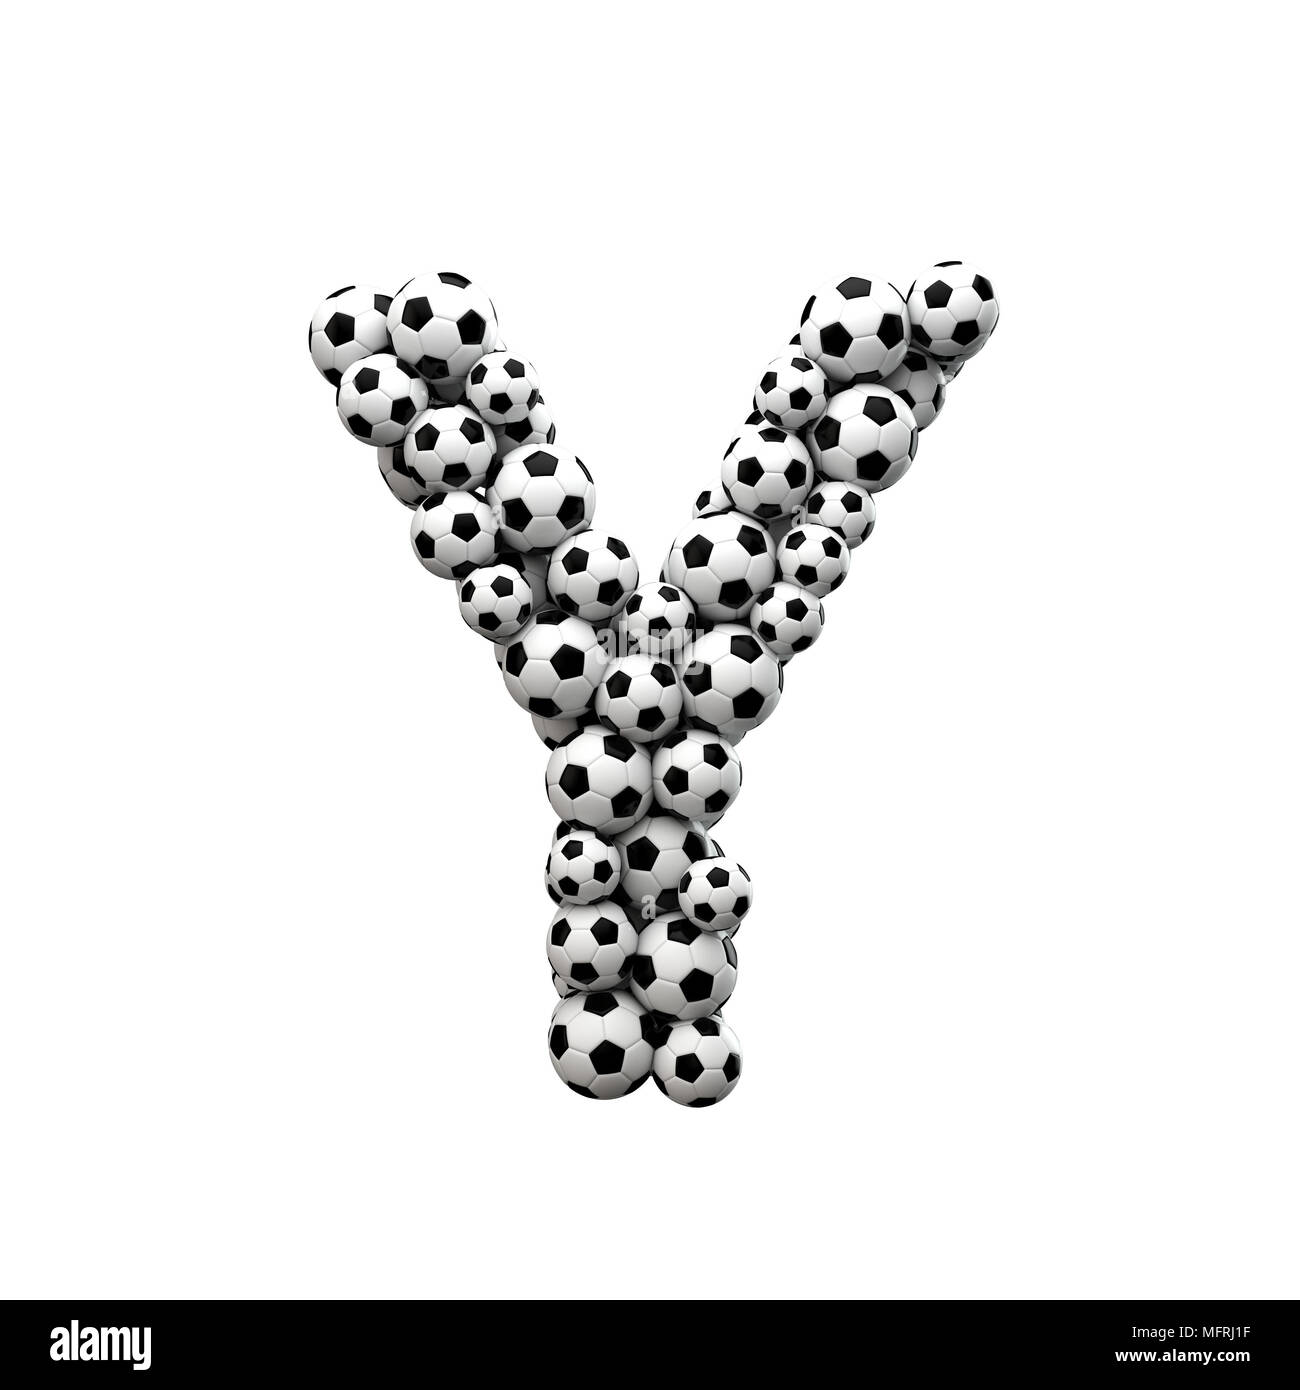 Capital letter Y font made from a collection of soccer balls. 3D Rendering Stock Photo